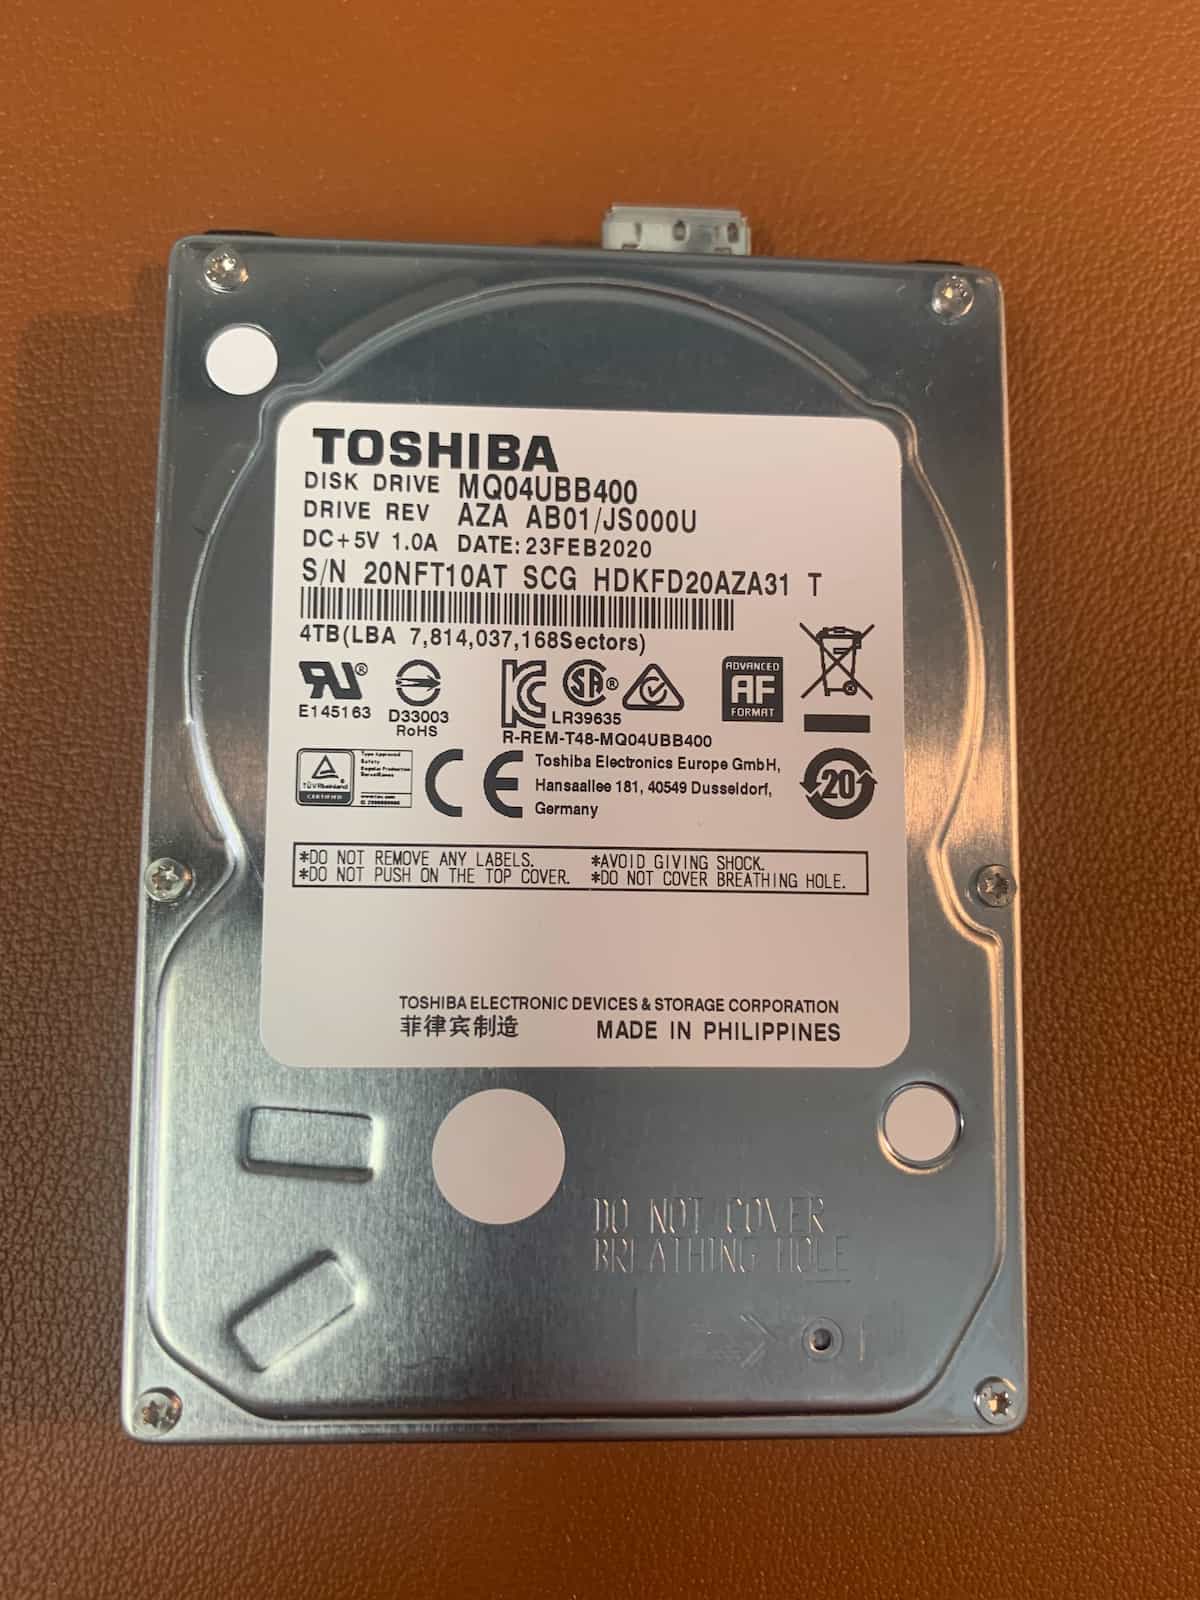 External USB Toshiba Drive that just stopped working.